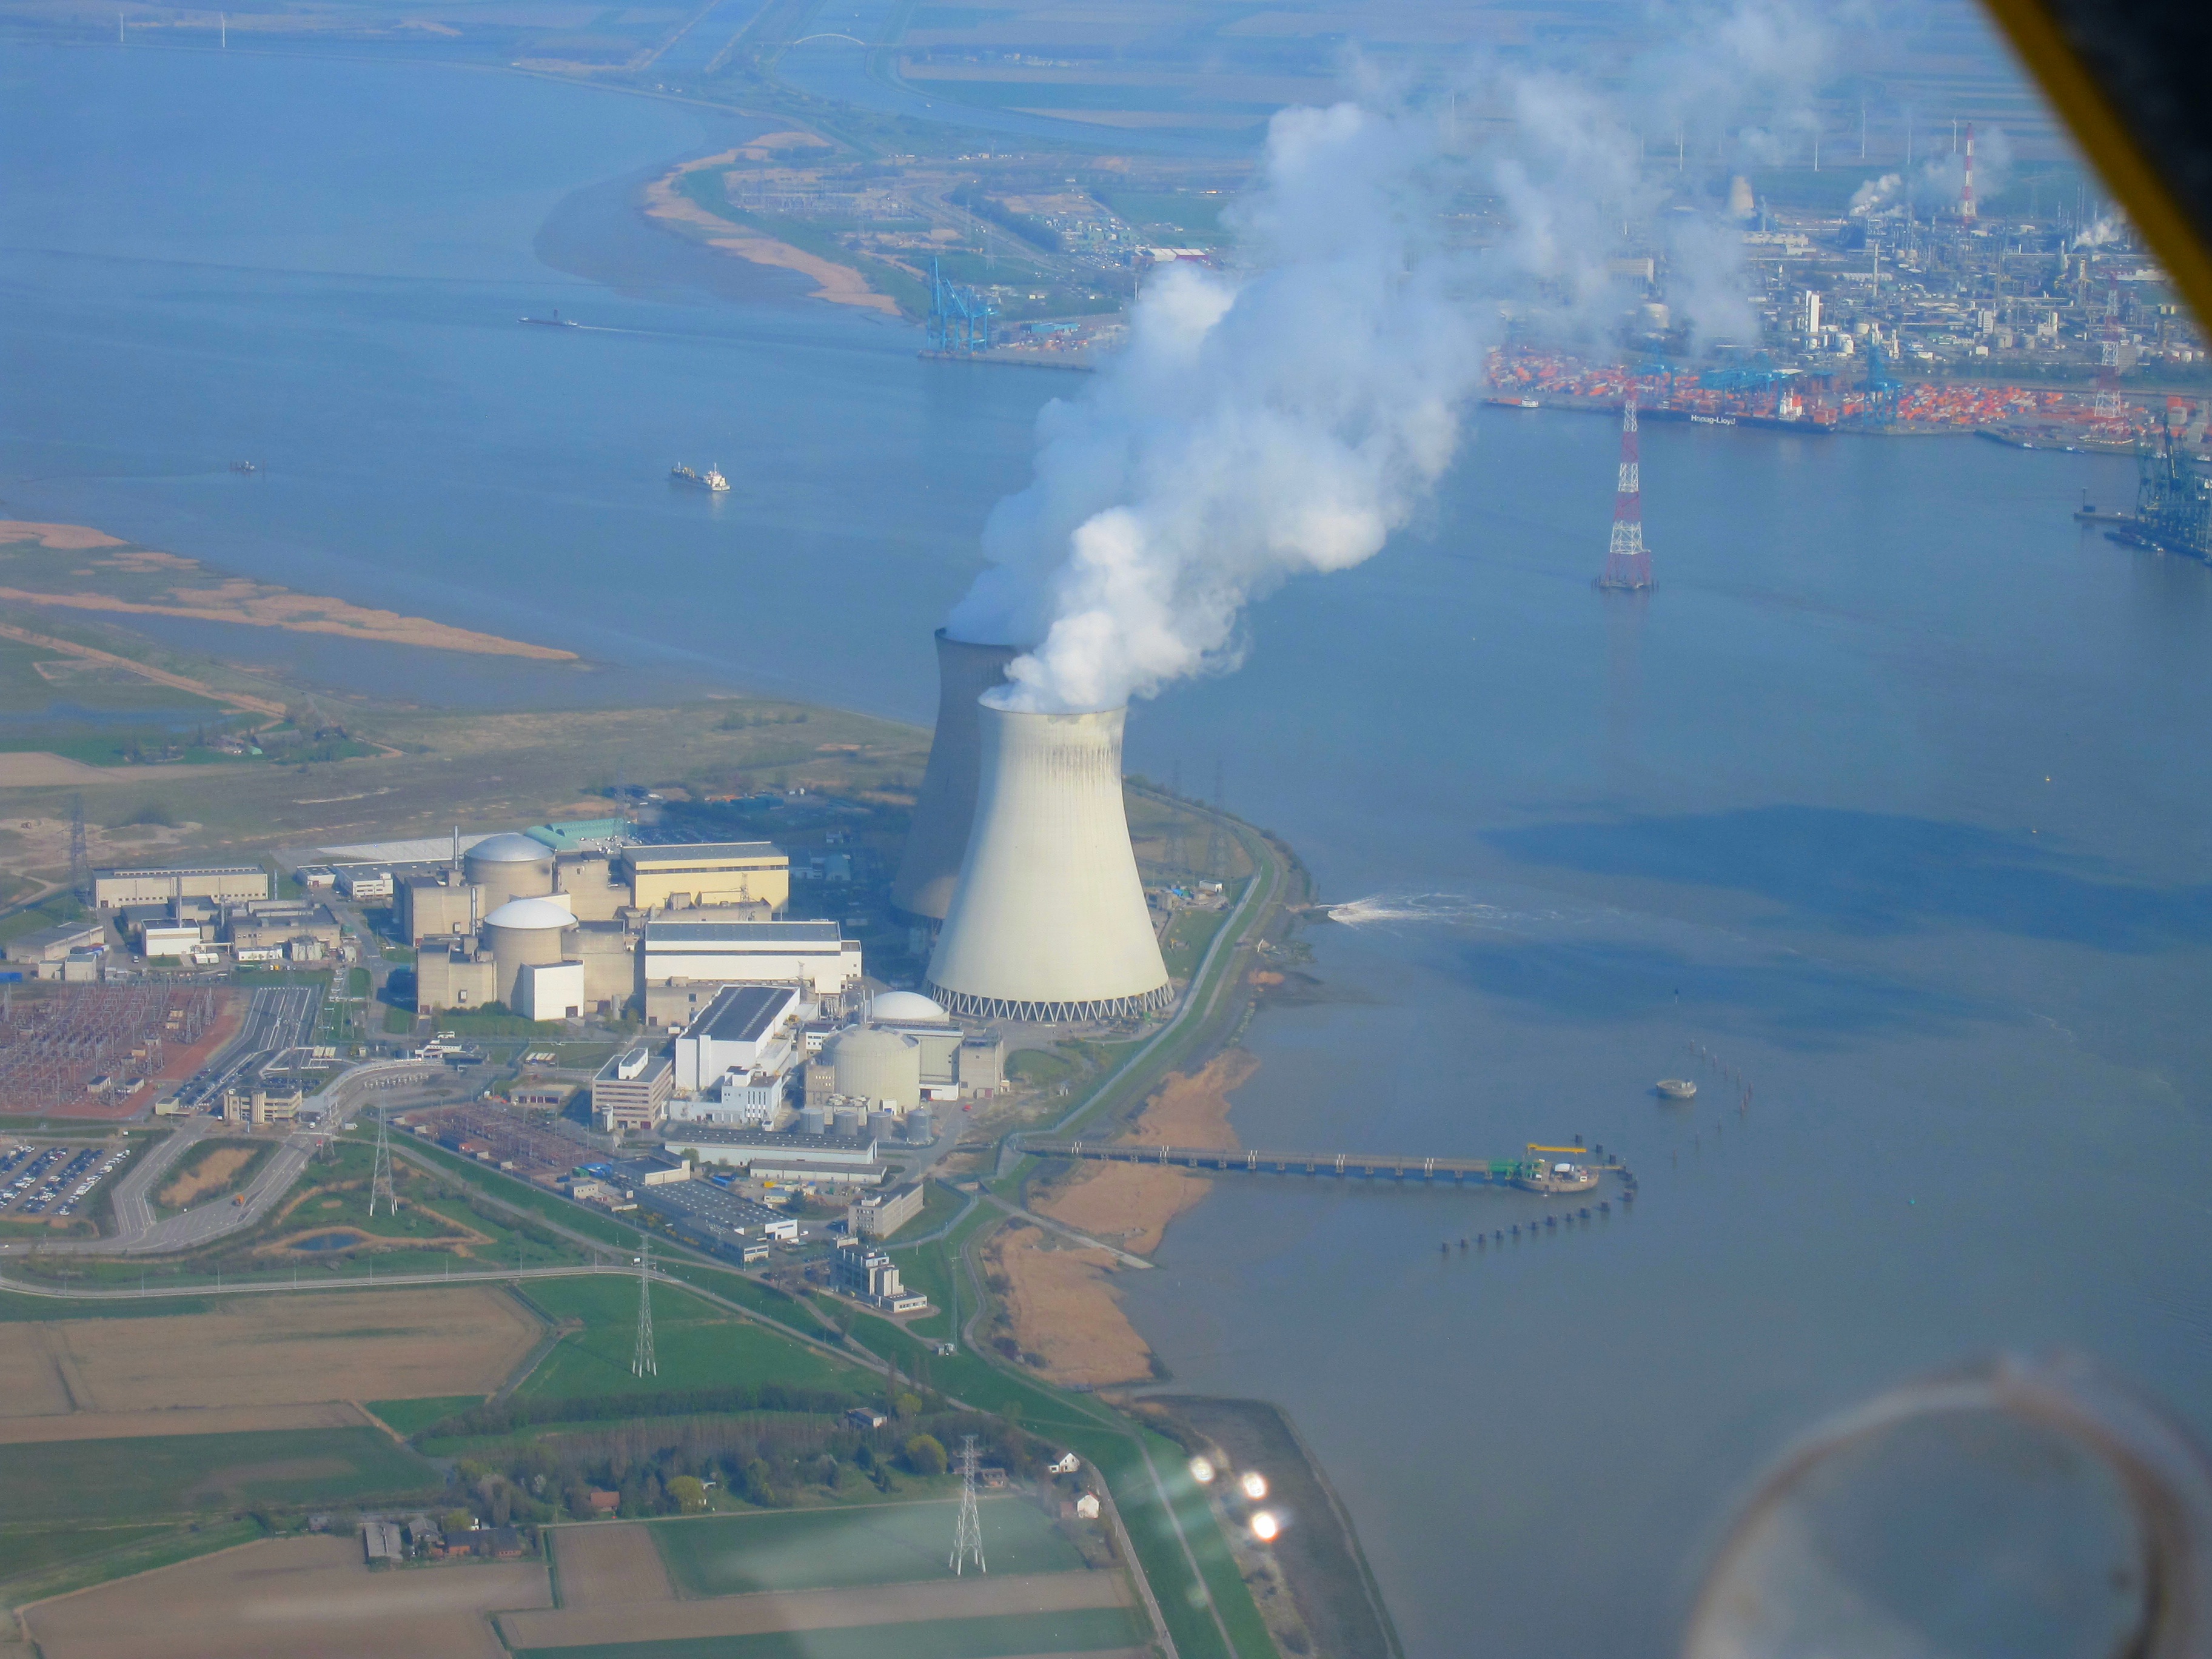 Belgium's Doel reactors. The U.S. NRC doesn't seem to care that cracking in their reactor pressure vessels may exist in U.S. reactors as well. Photo from Wikipedia.